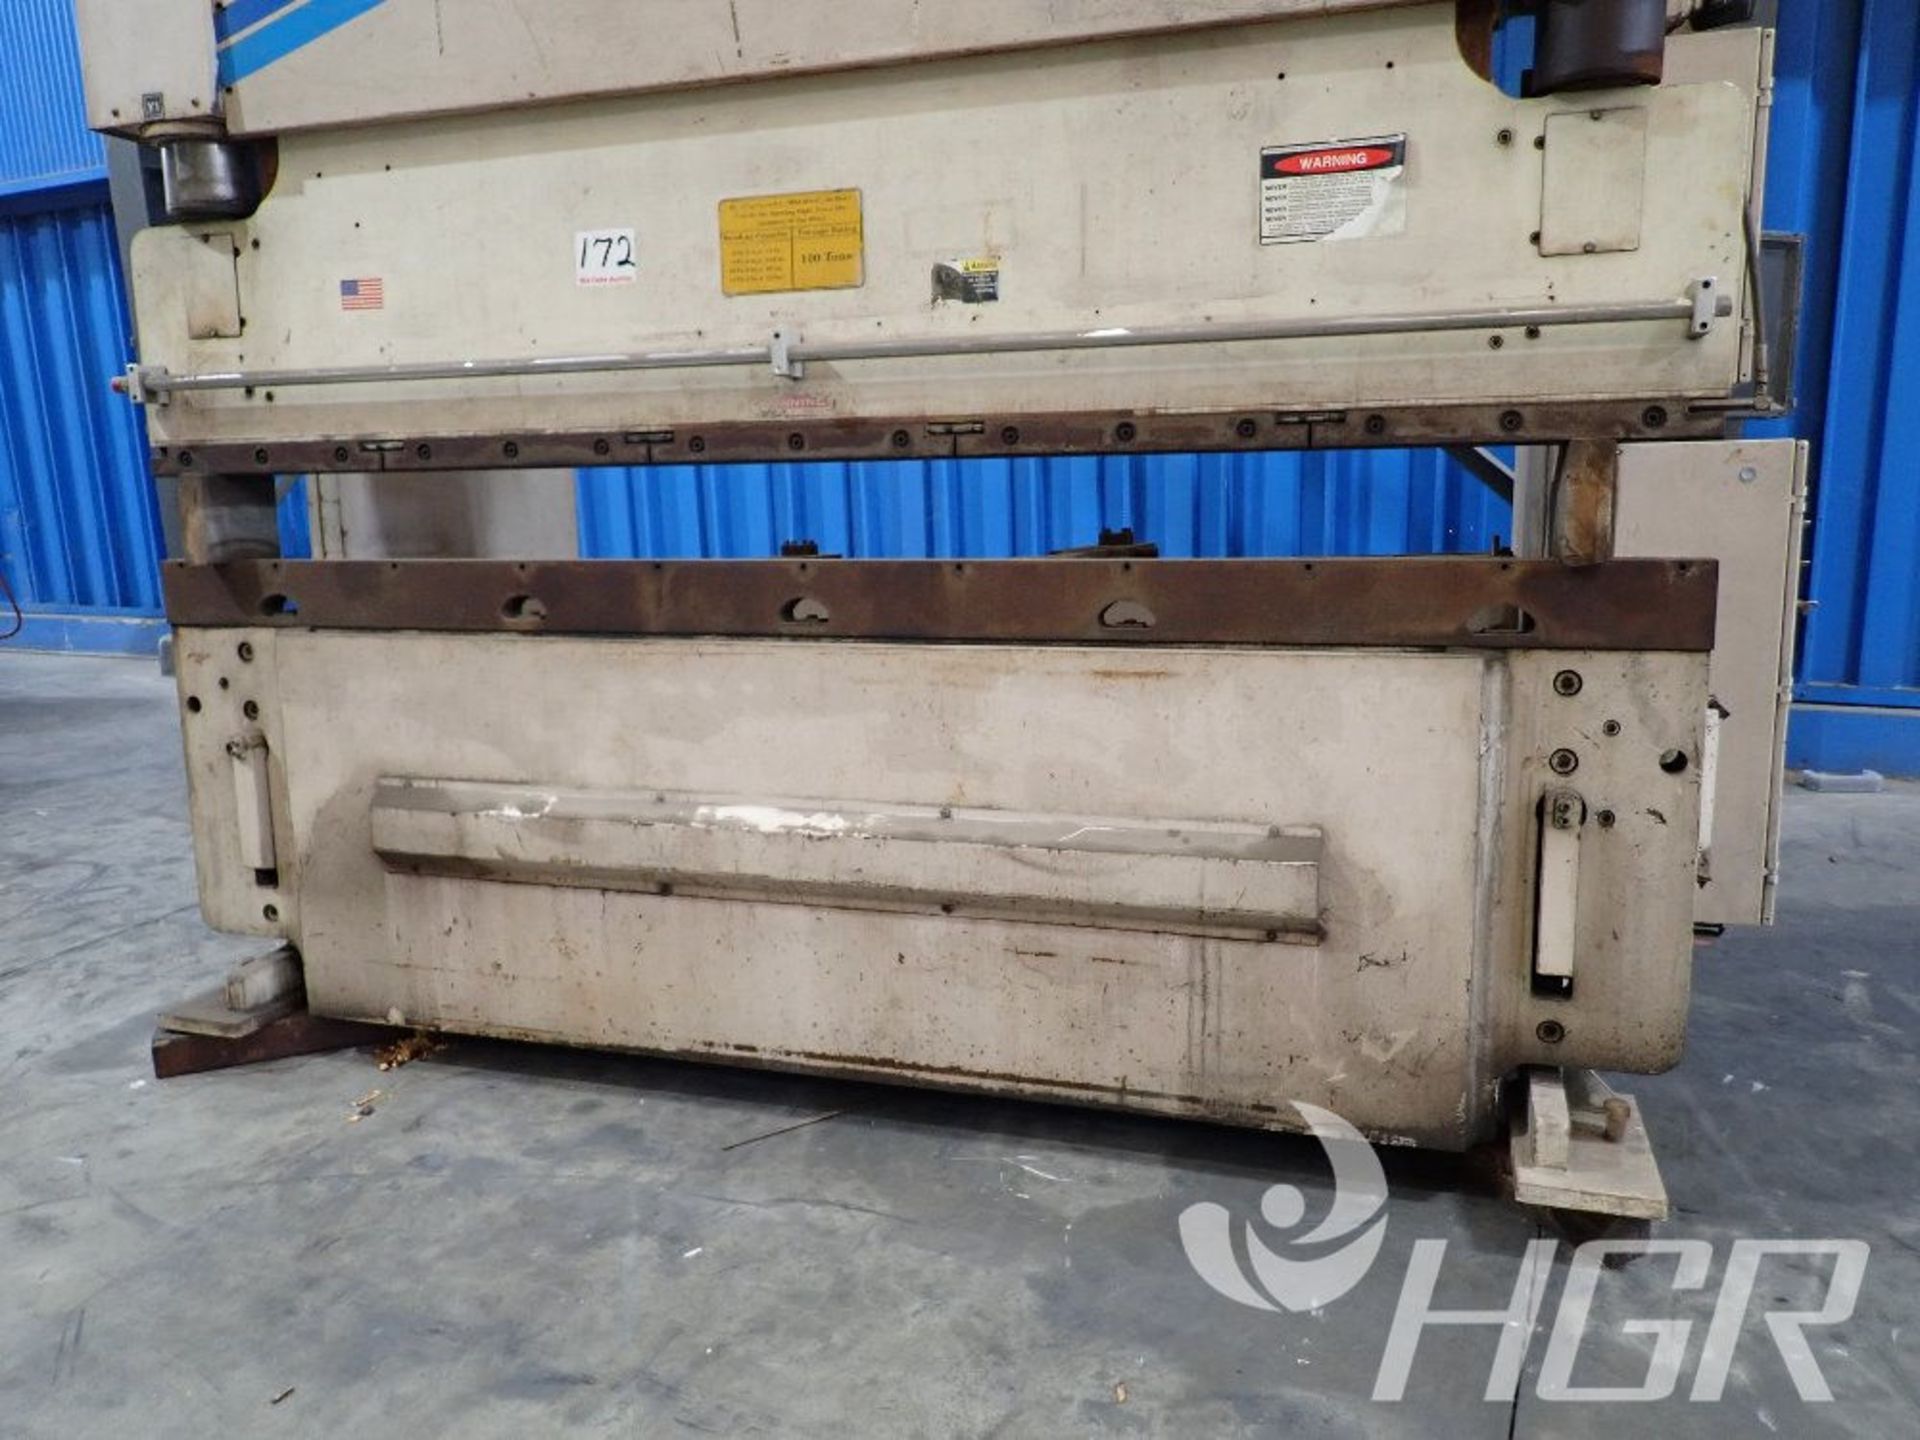 WYSONG CNC PRESS BRAKE, Model PHP100-120, Date: n/a; s/n HPB46-127-X, Approx. Capacity: 100 TON 10', - Image 5 of 25